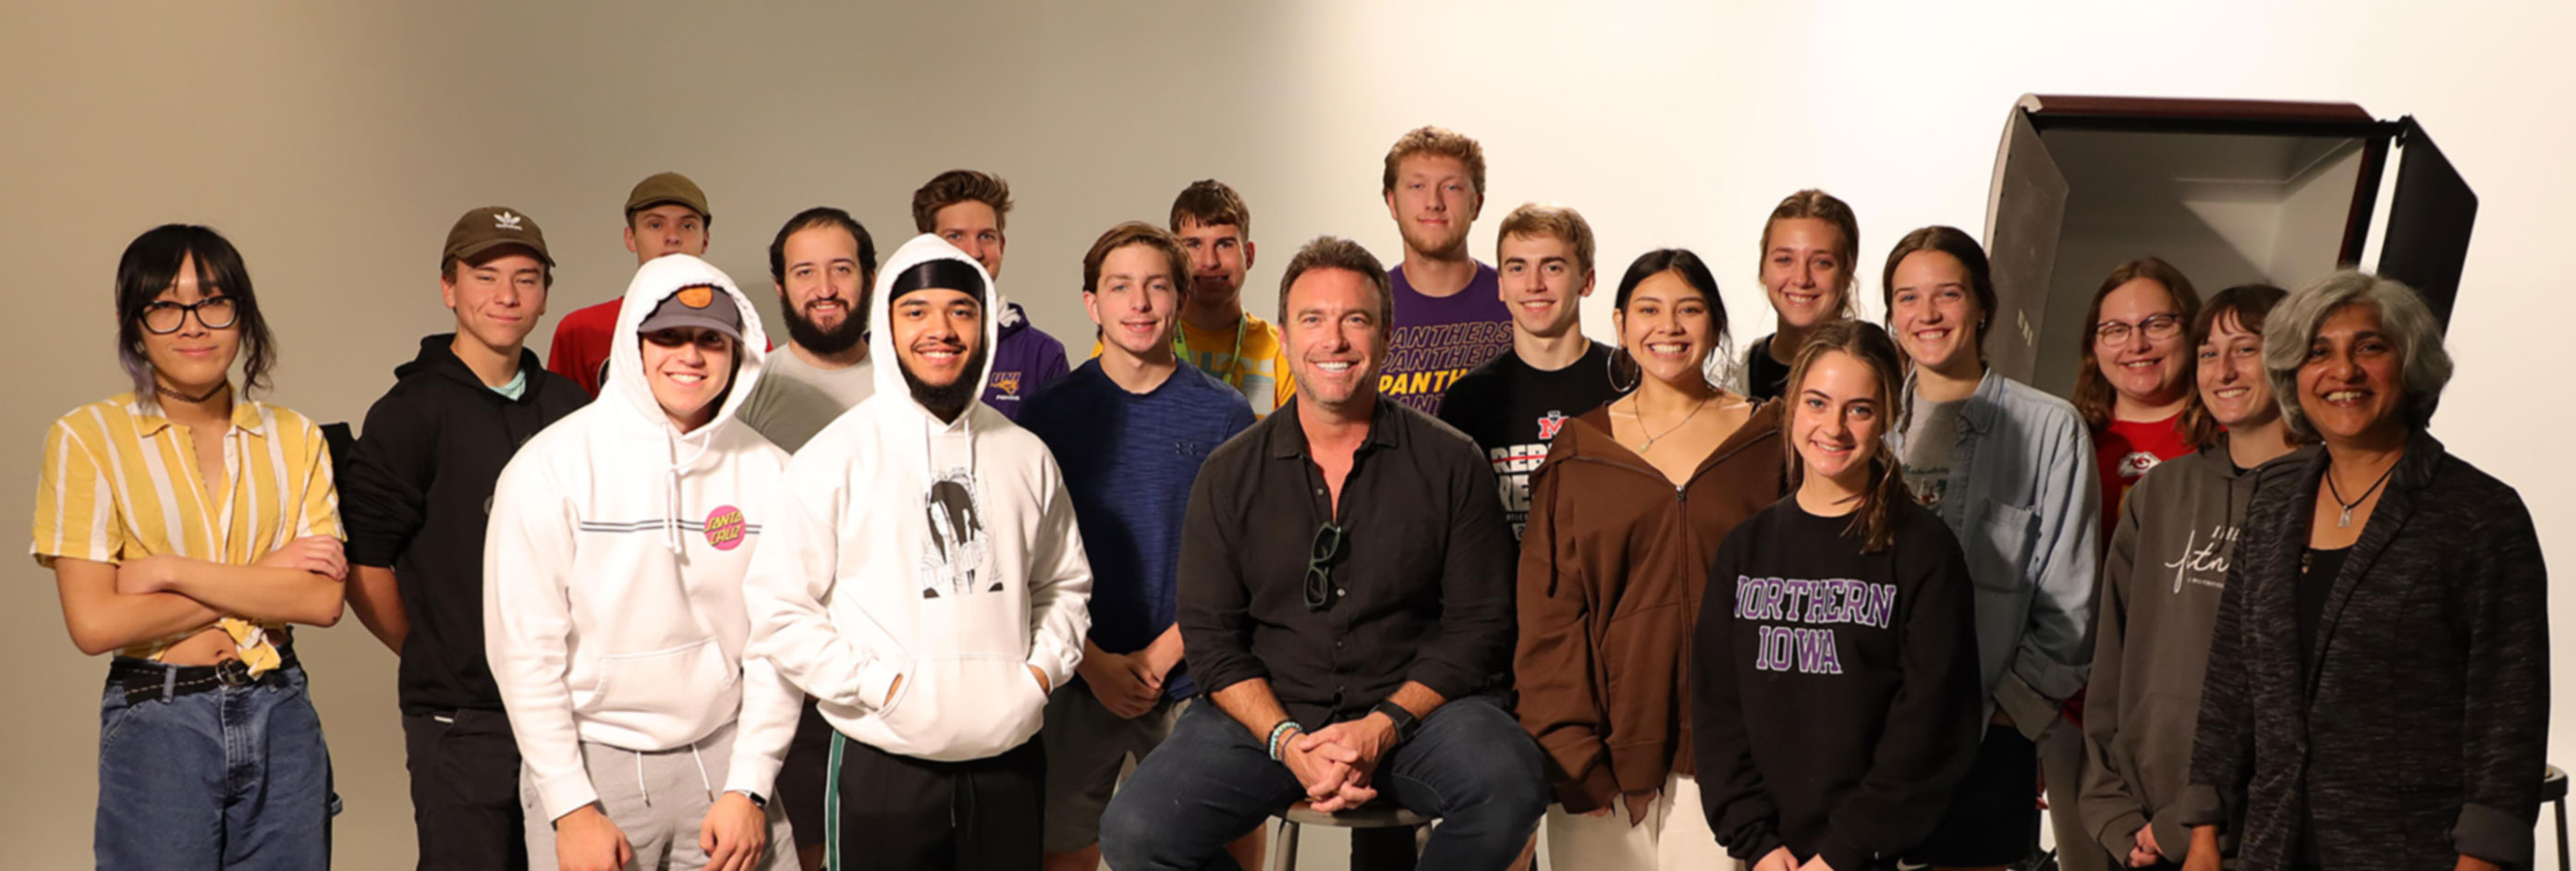 Digital Media class with Alex Boylan, host of The College Tour